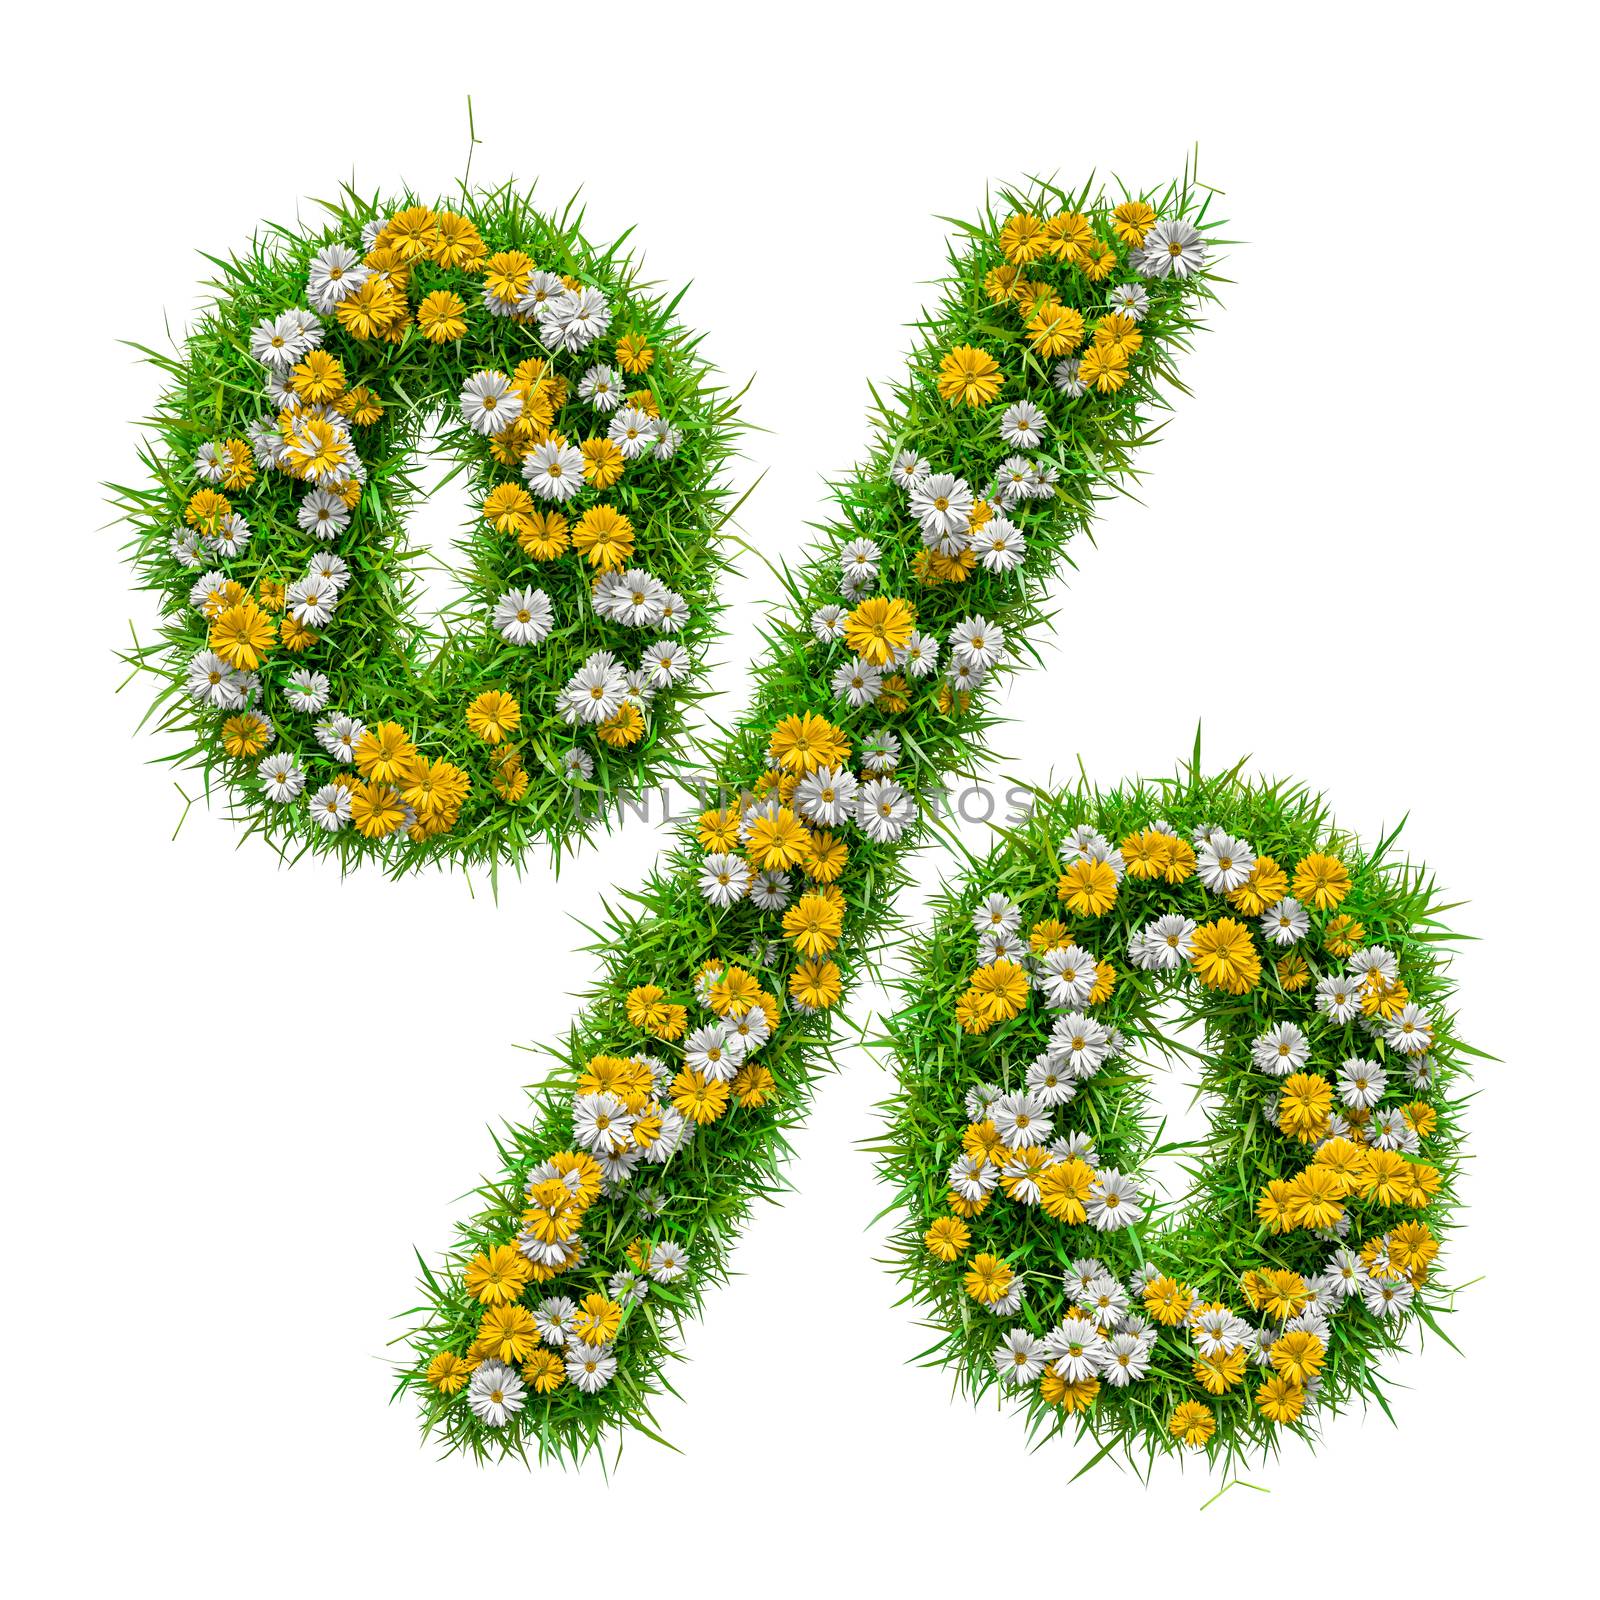 Percent Sign of Green Grass And Flowers, isolated on white background. 3D illustration